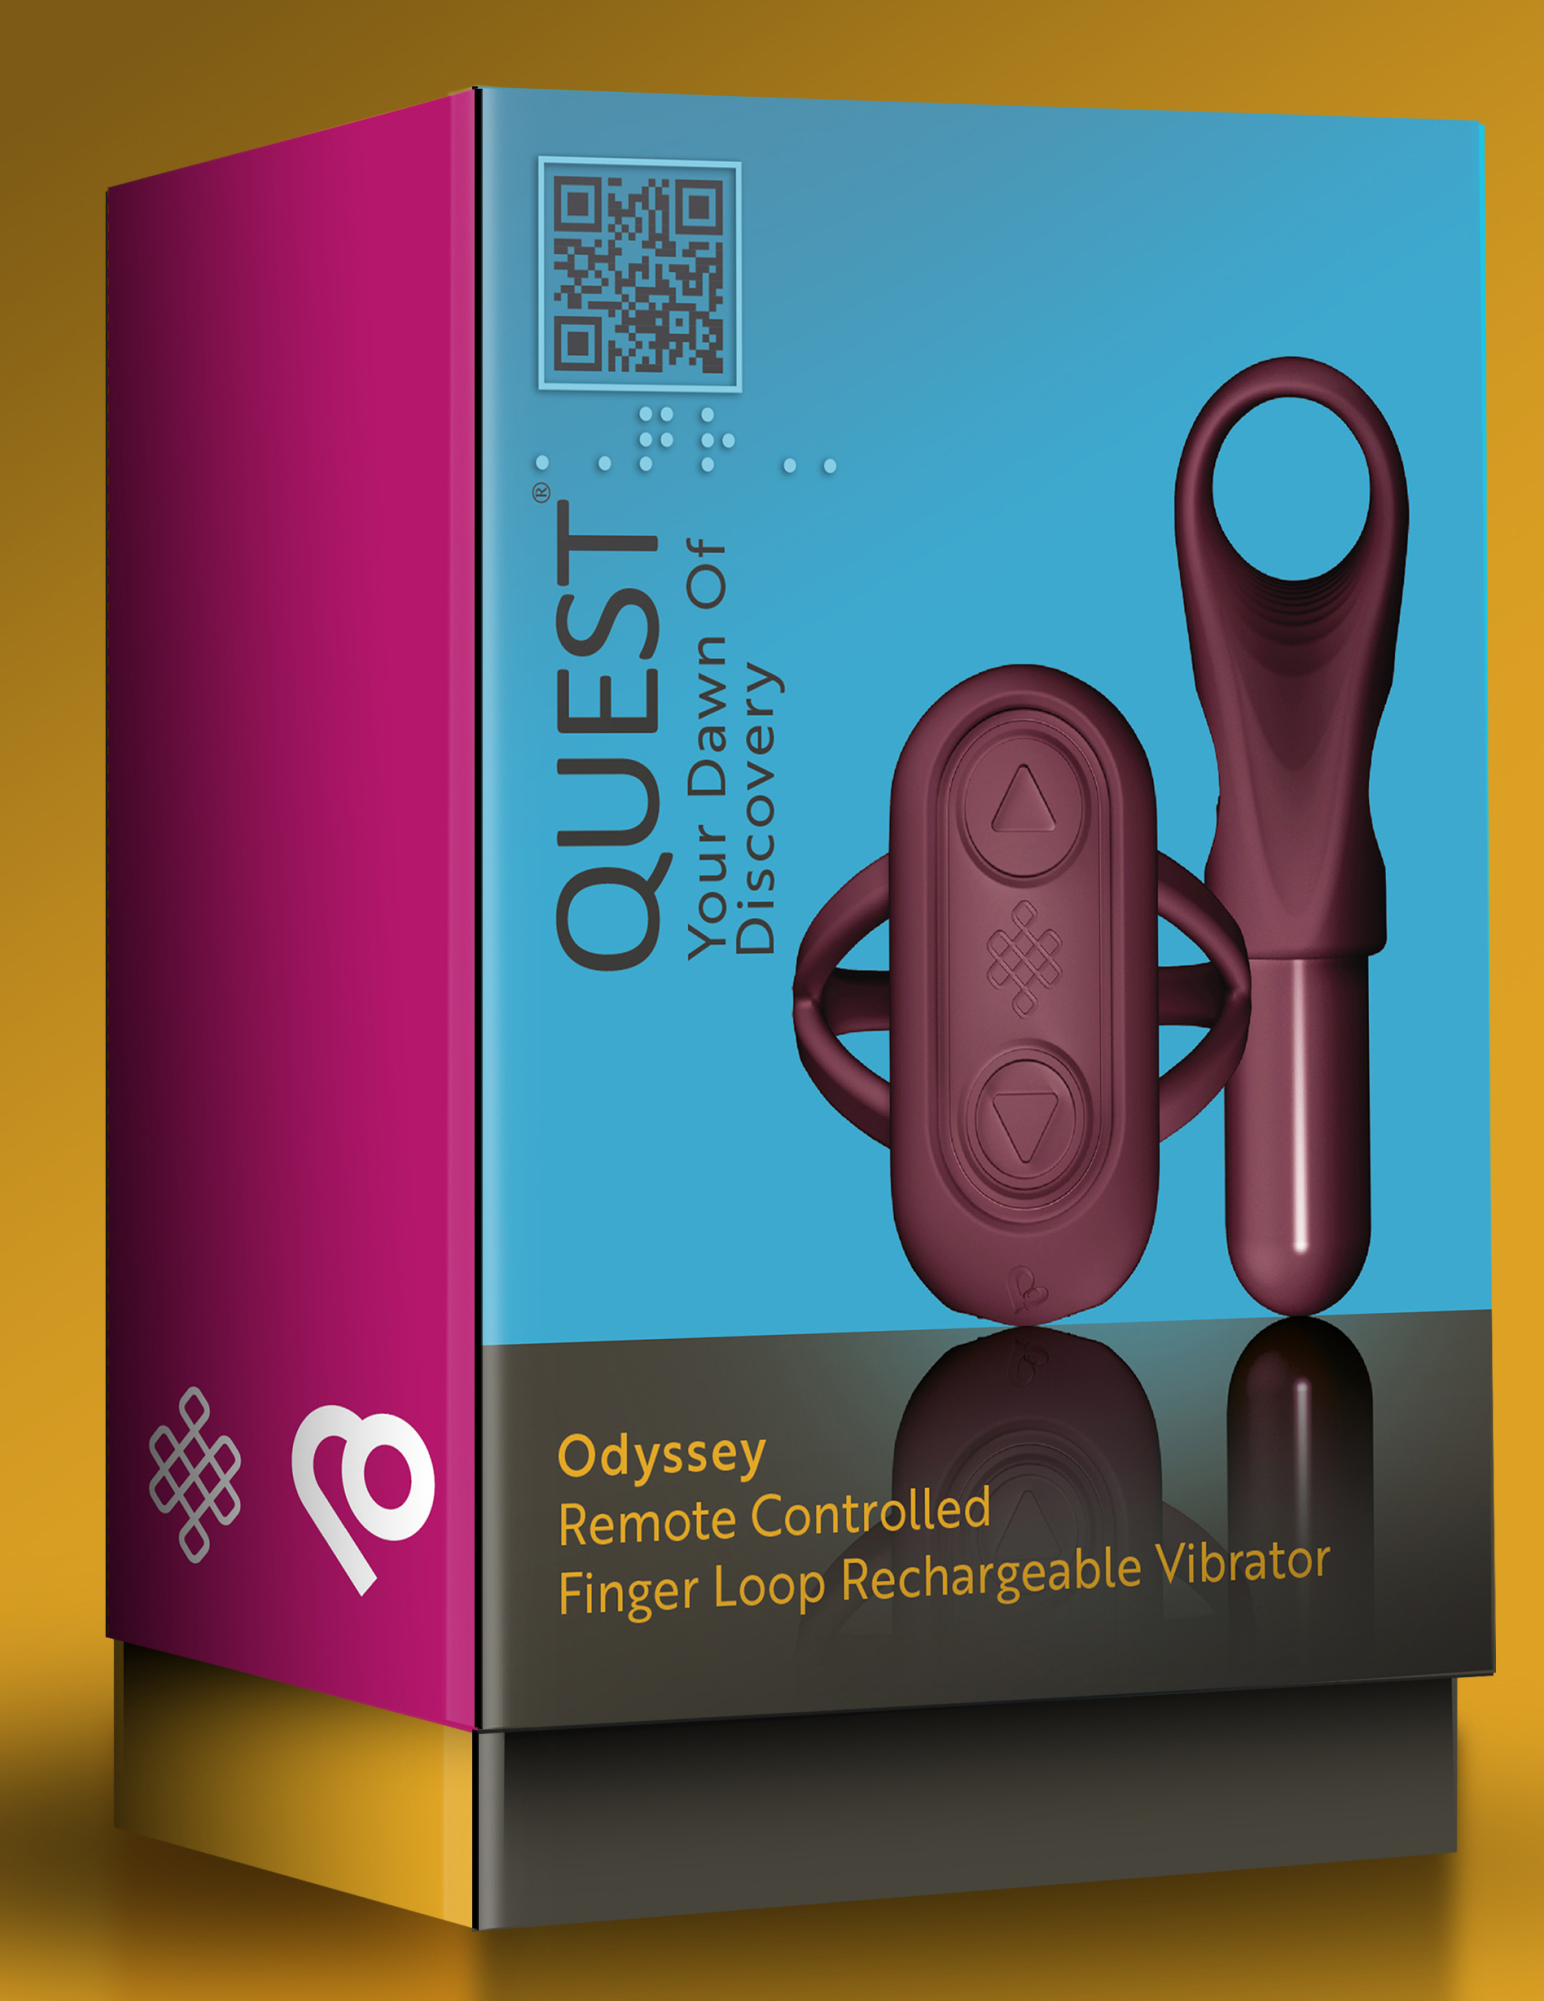 A boxed "Odyssey" sex toy from the quest range. The box is orange, purple and blue, and the sex toy and finger loop attachment are displayed on the front.